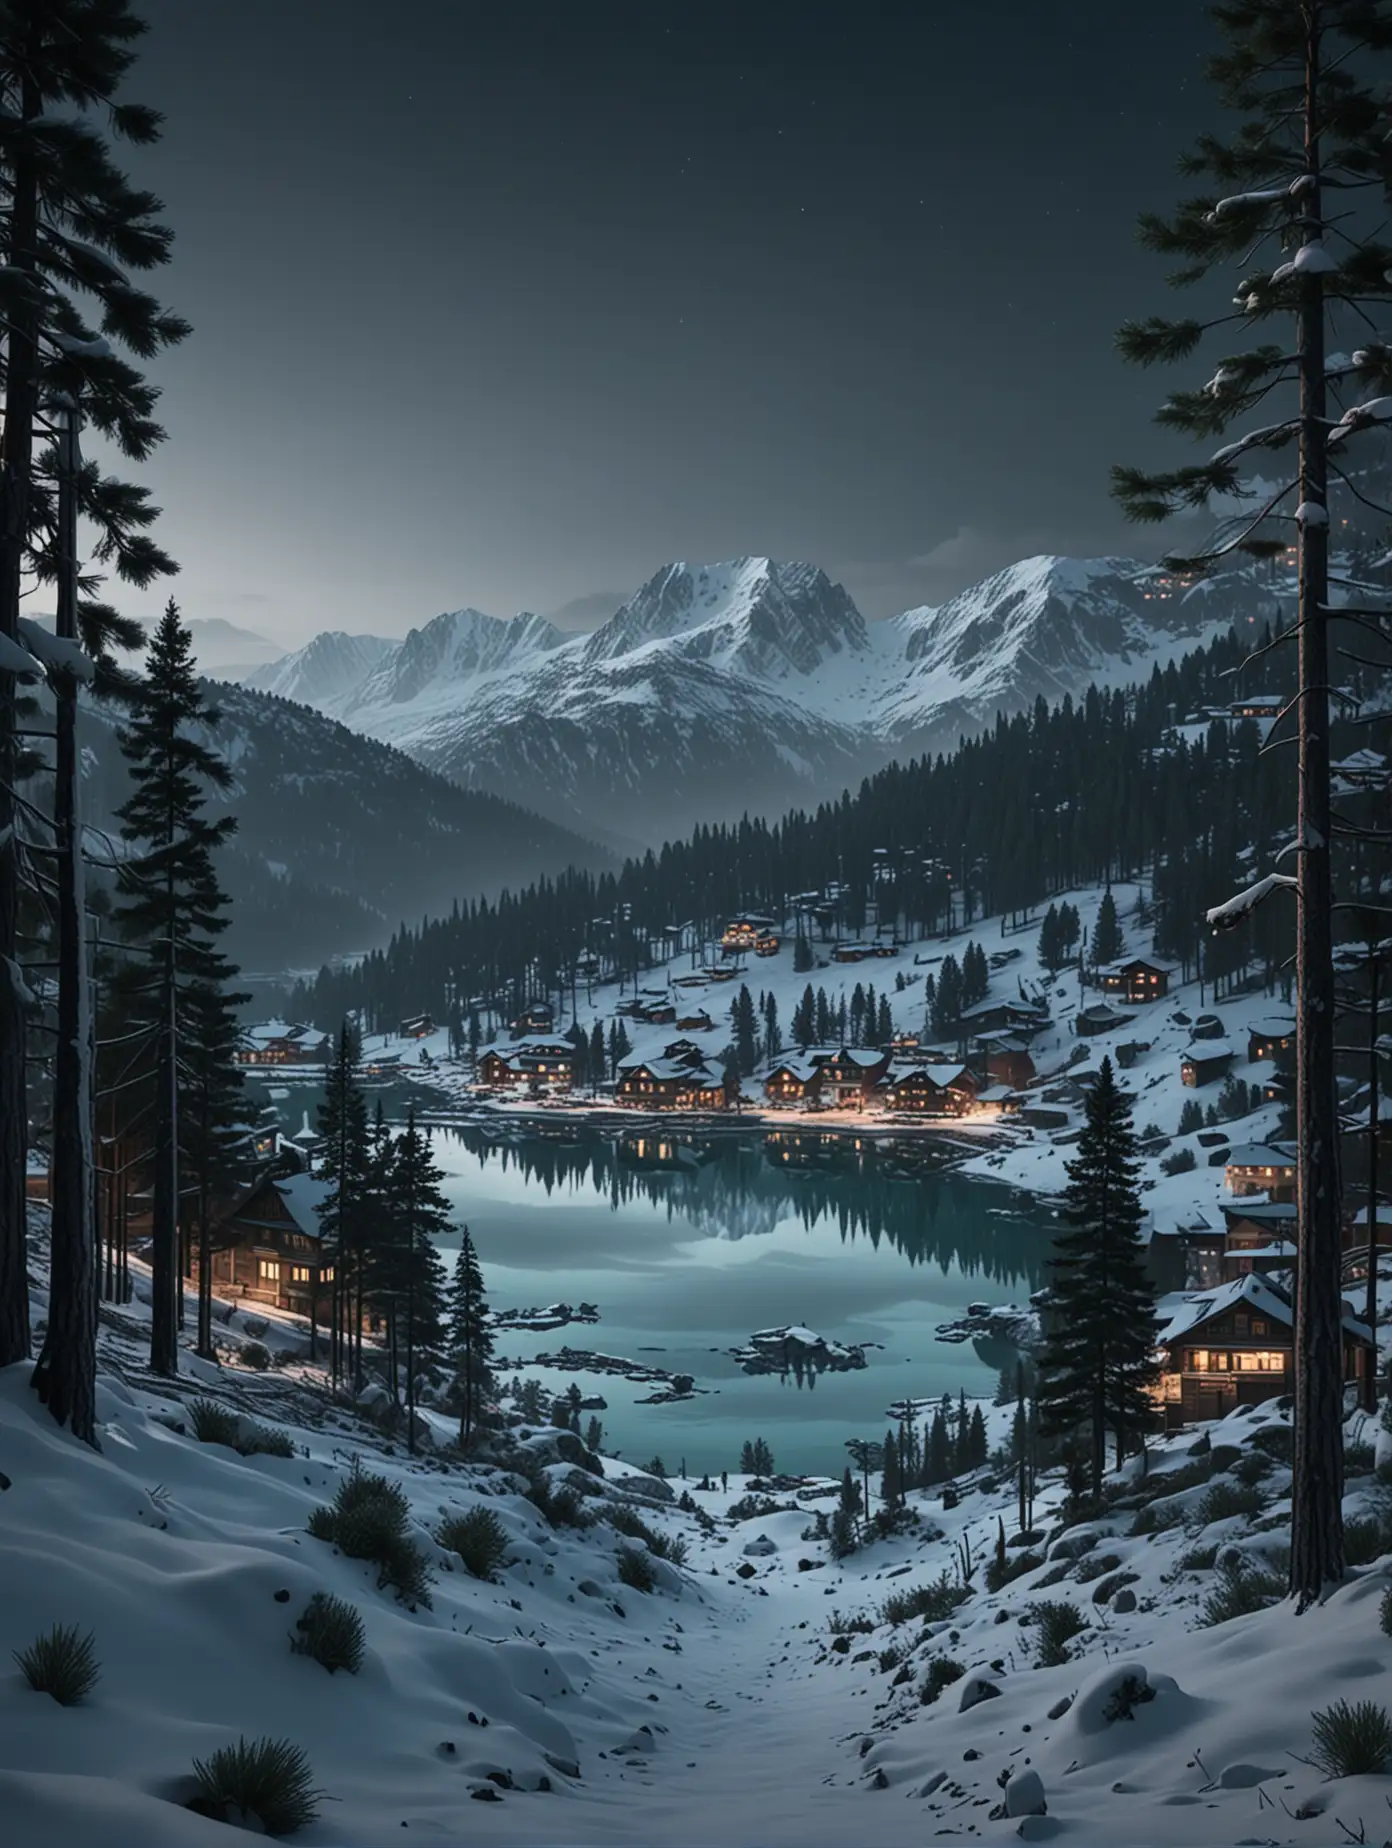 Snowy Mountain Village Twilight Scene with Illuminated Houses and Pine Trees